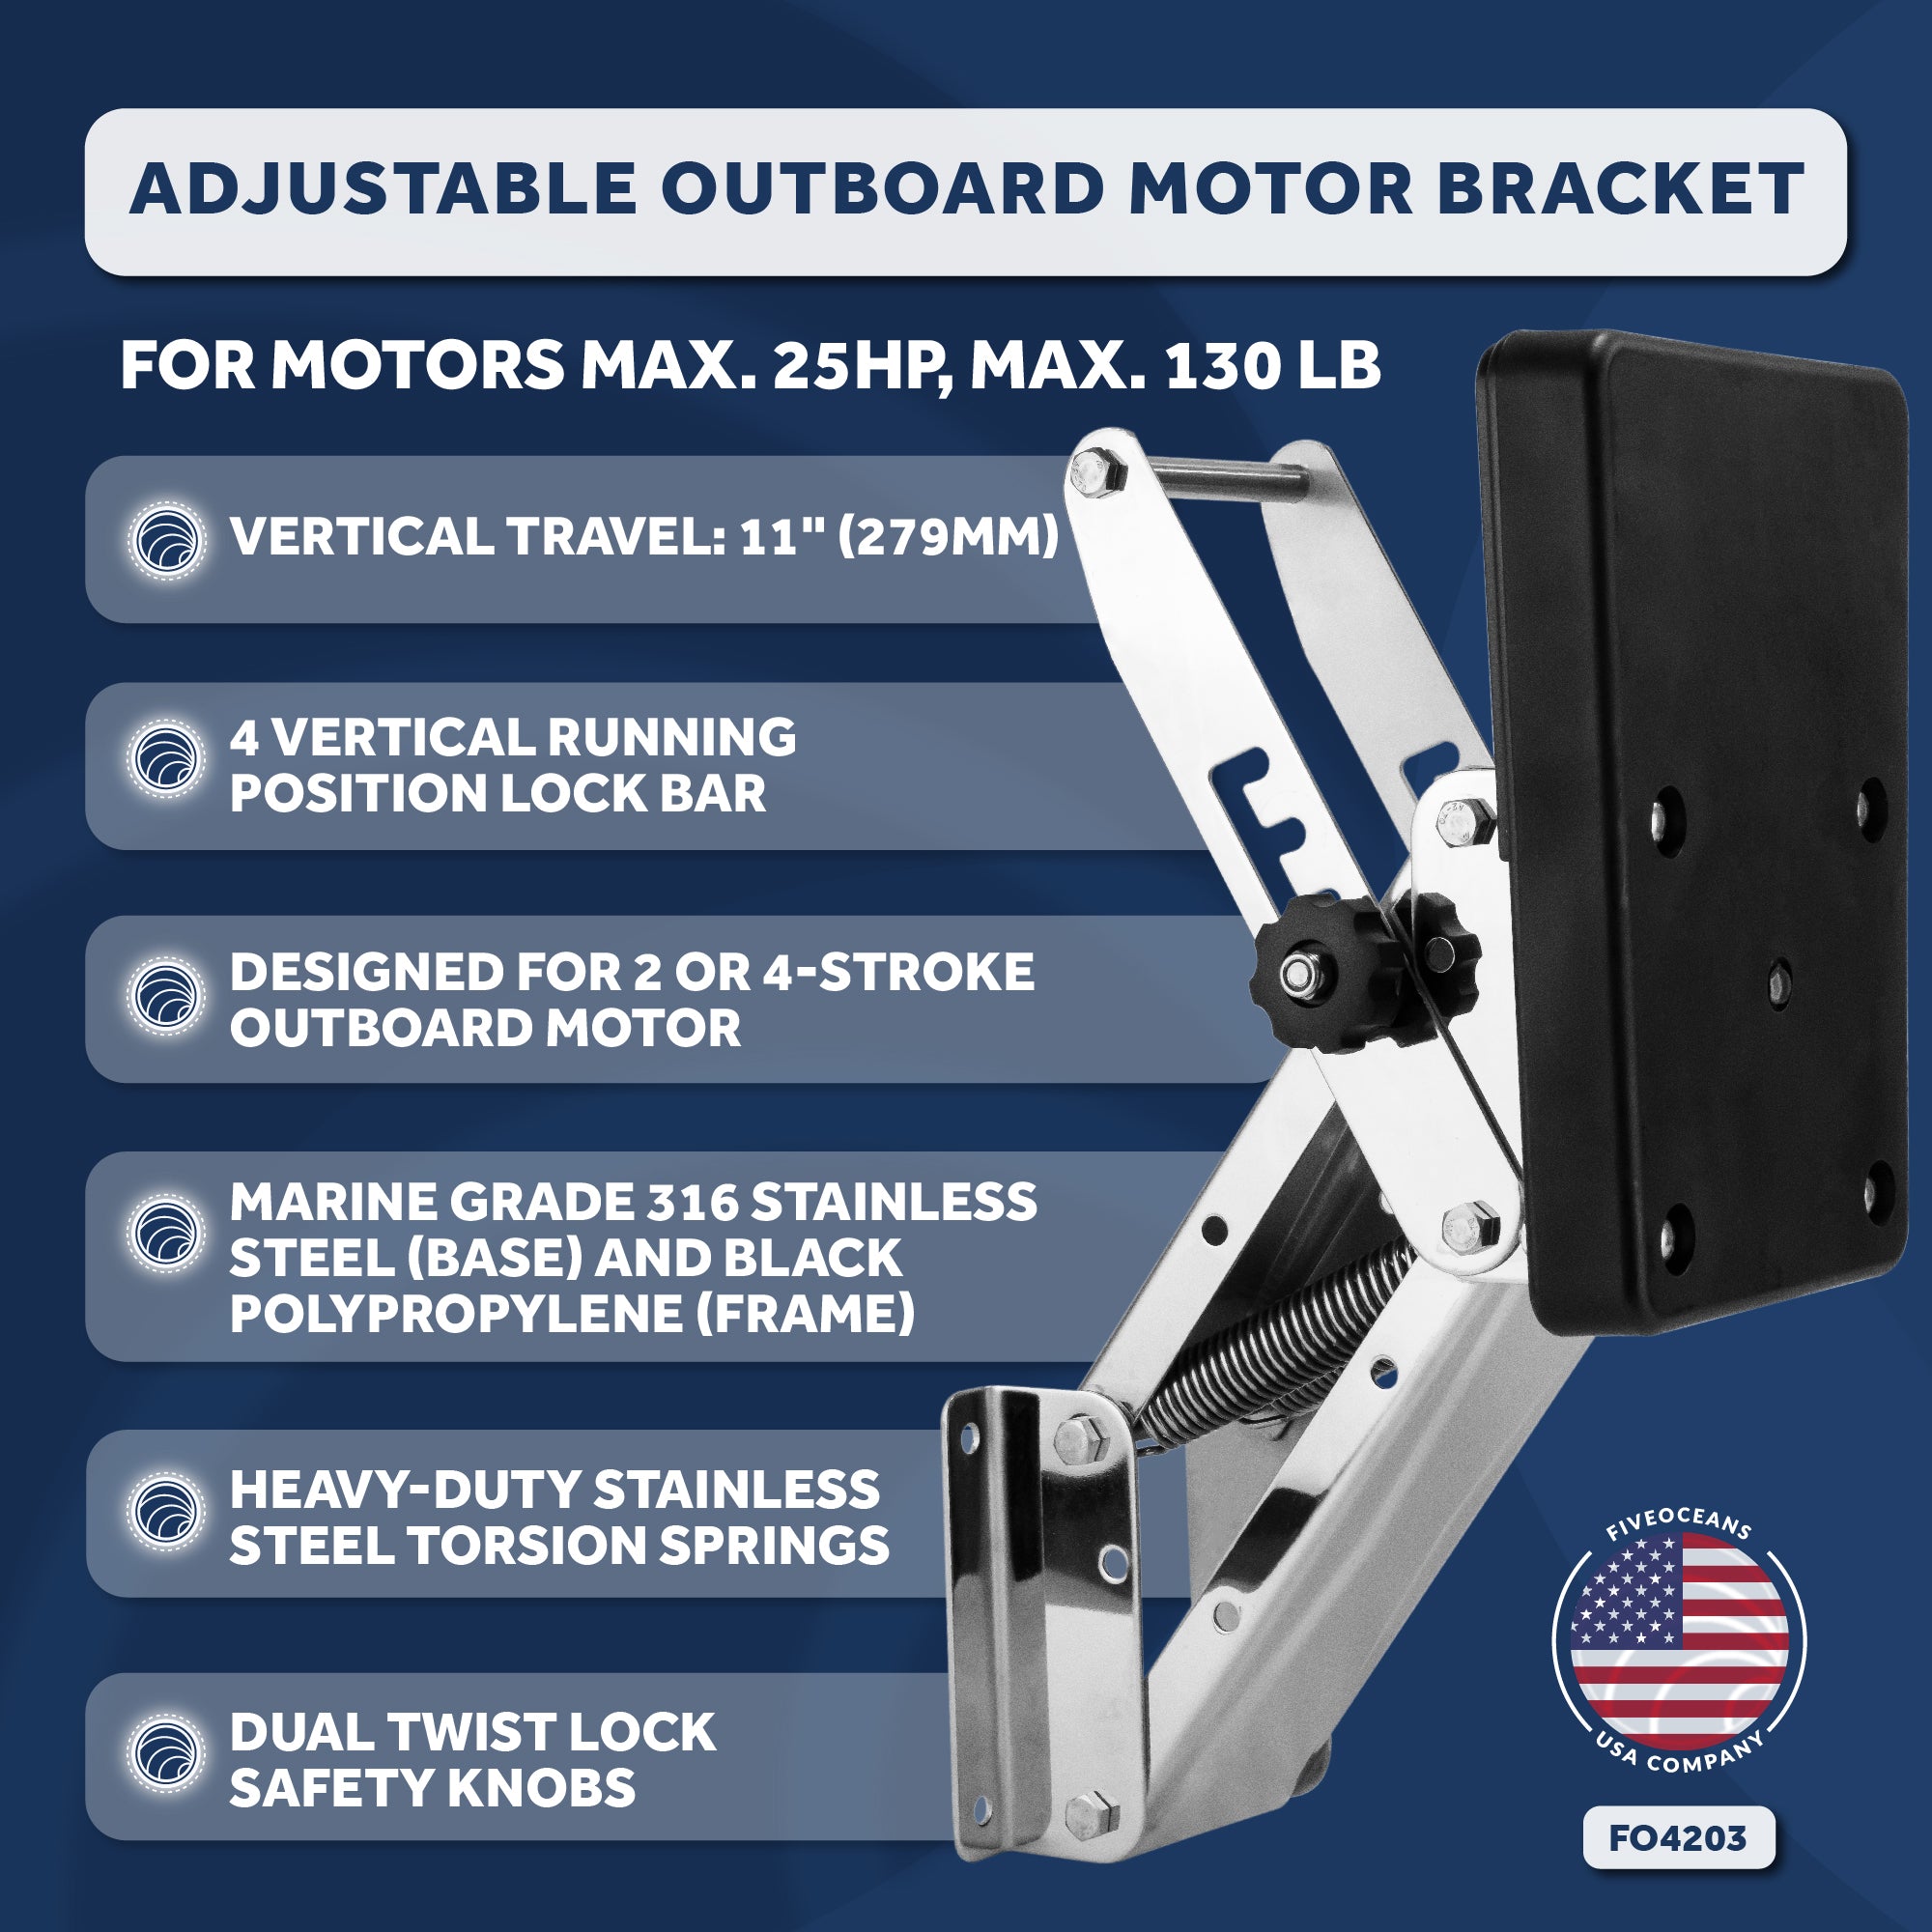 Adjustable Outboard Motor Bracket, Max. 25 Hp, Max. 130 Lb, 11-Inch of Travel, 316 Stainless Steel, Black Board - FO4205